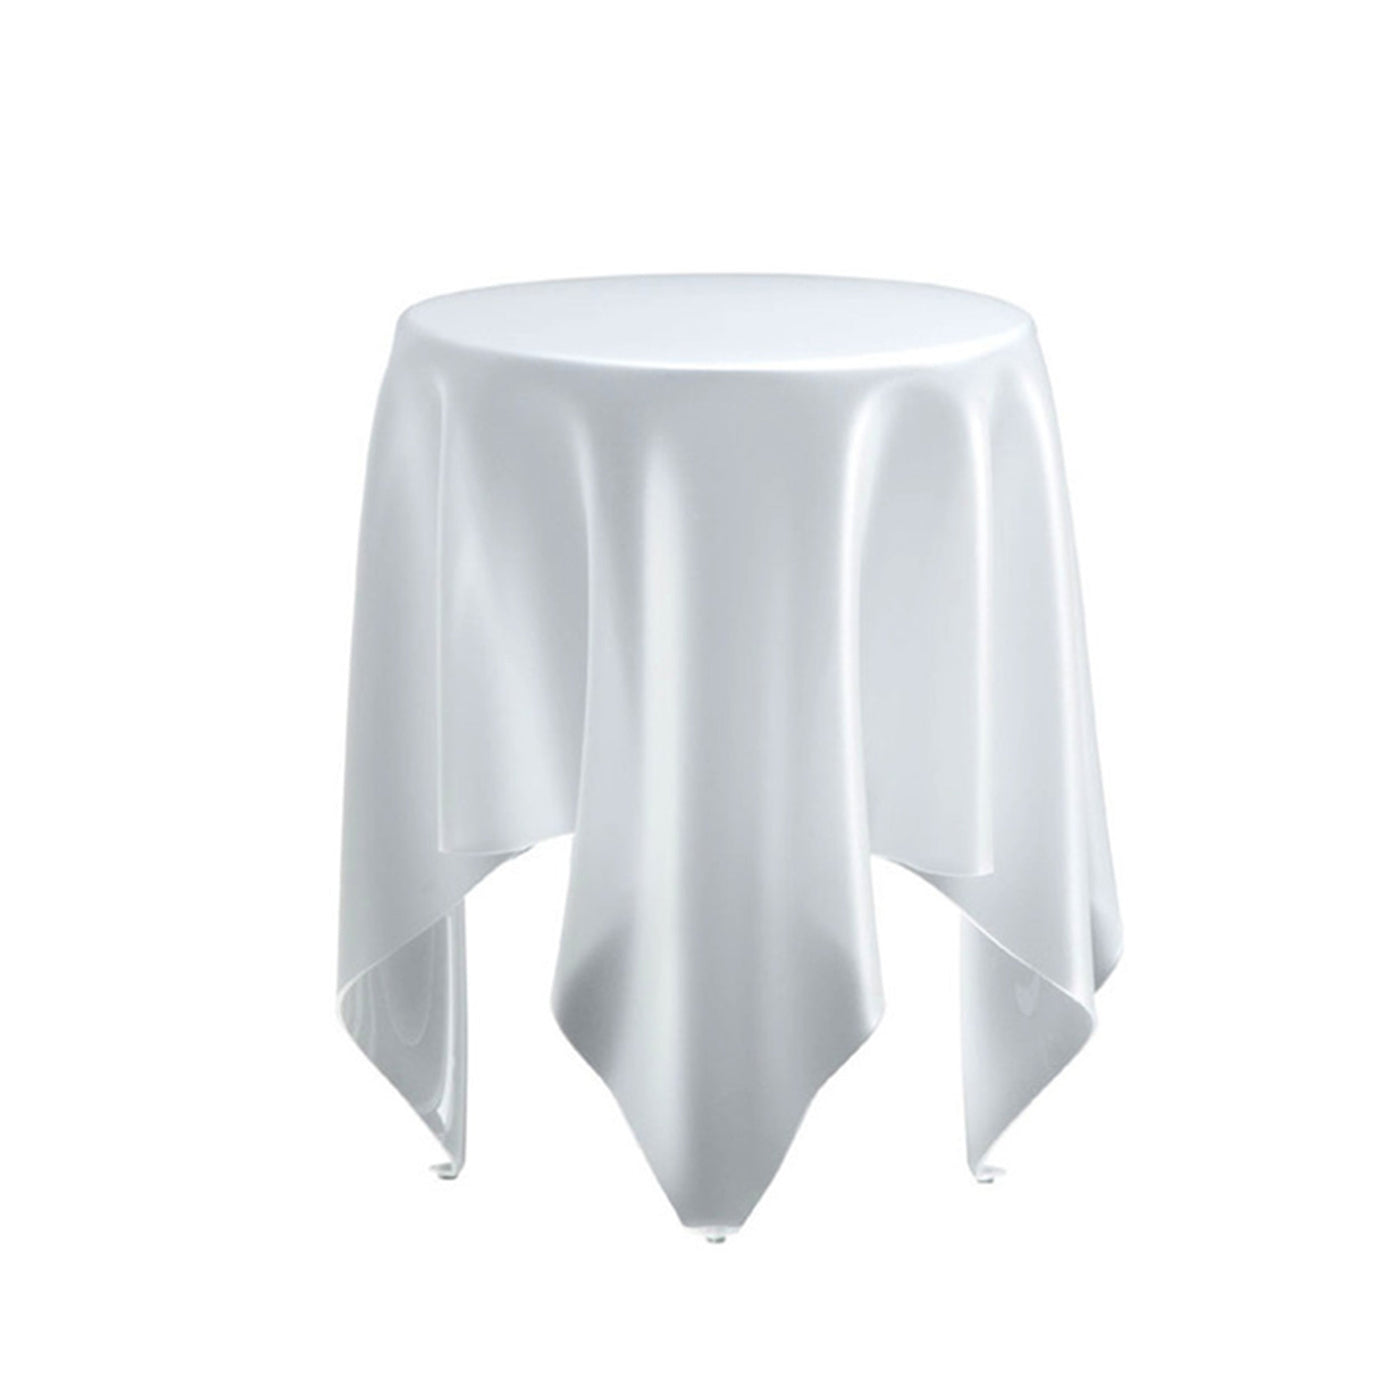 Illusion Table - Ice White by John Brauer